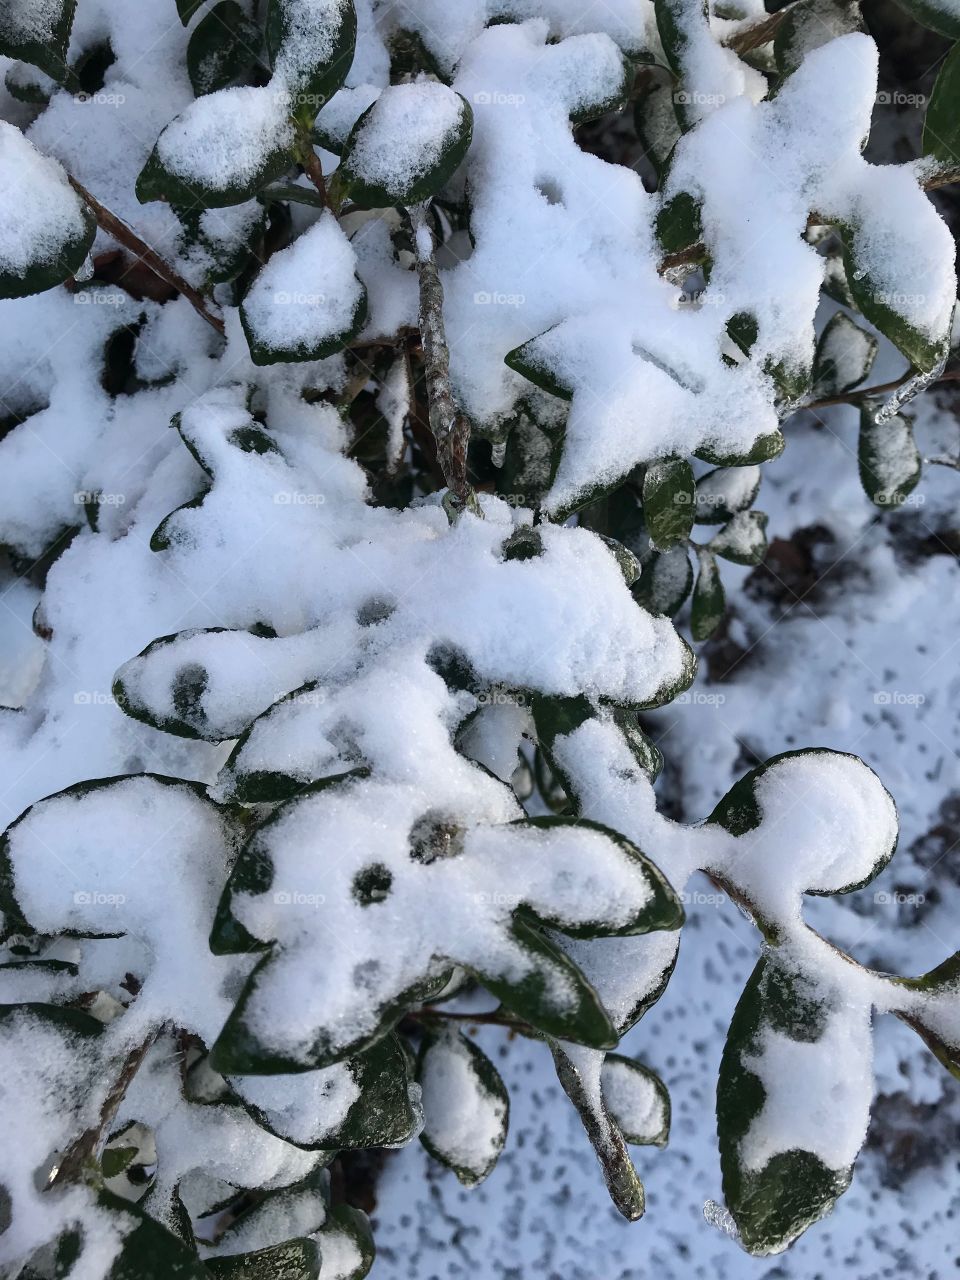 South Georgia winter 2018 snow covered bushes